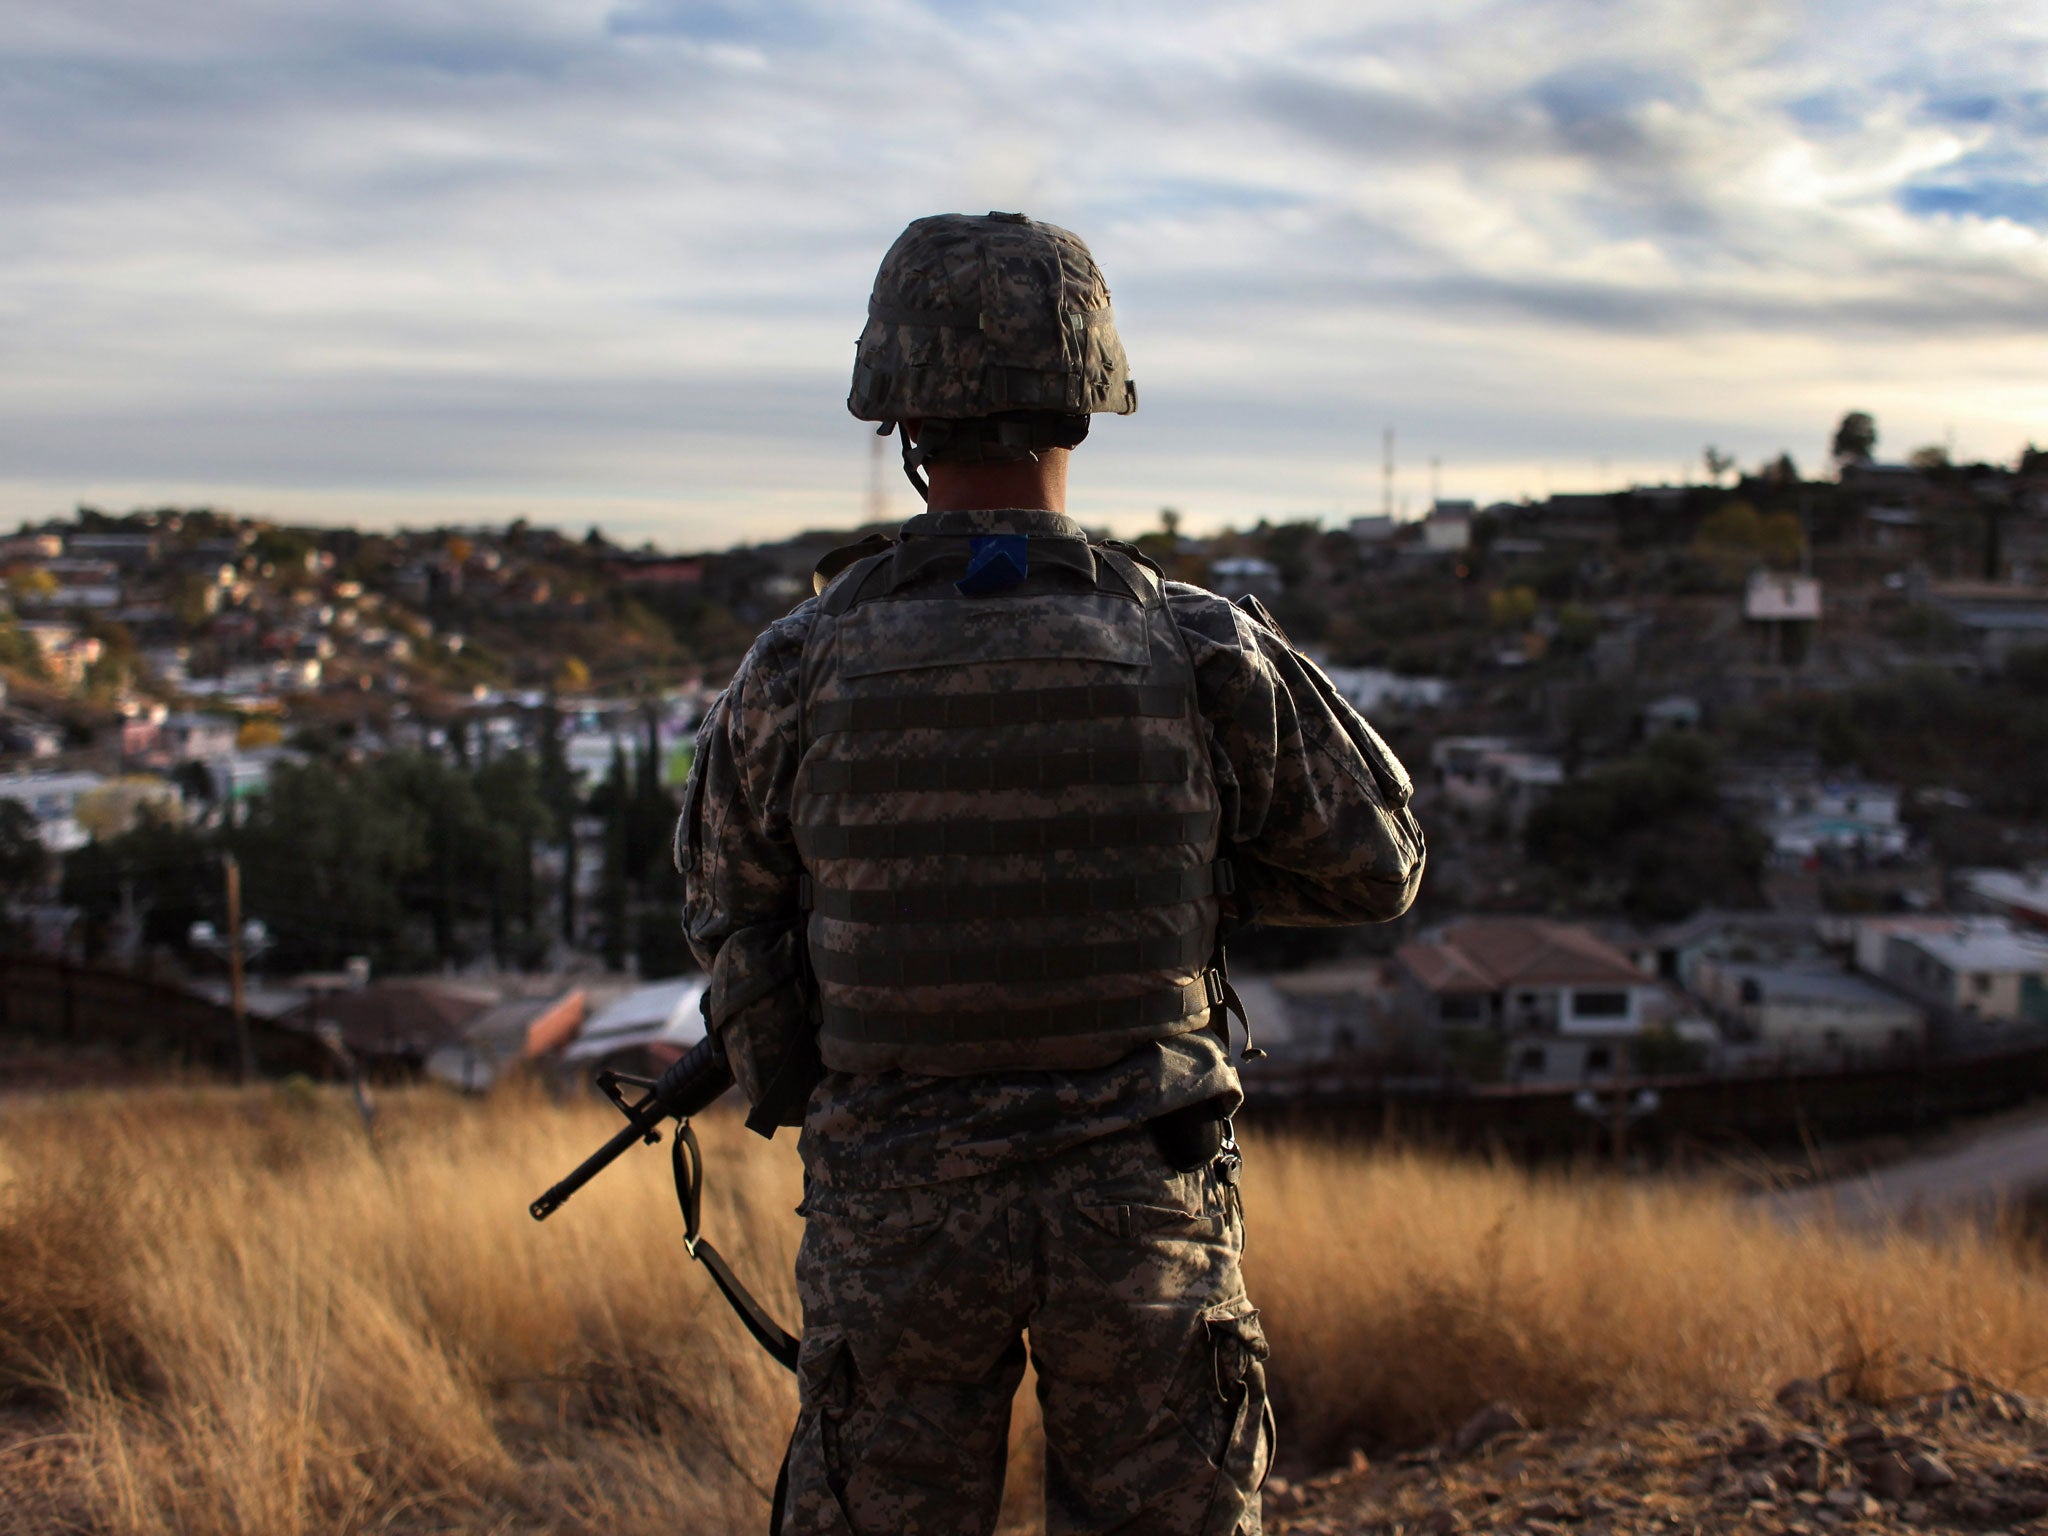 A National Guardsman at an observation post in Nogales, Arizona. Last year, a 16-year-old was shot 10 times here by Border Patrol agents